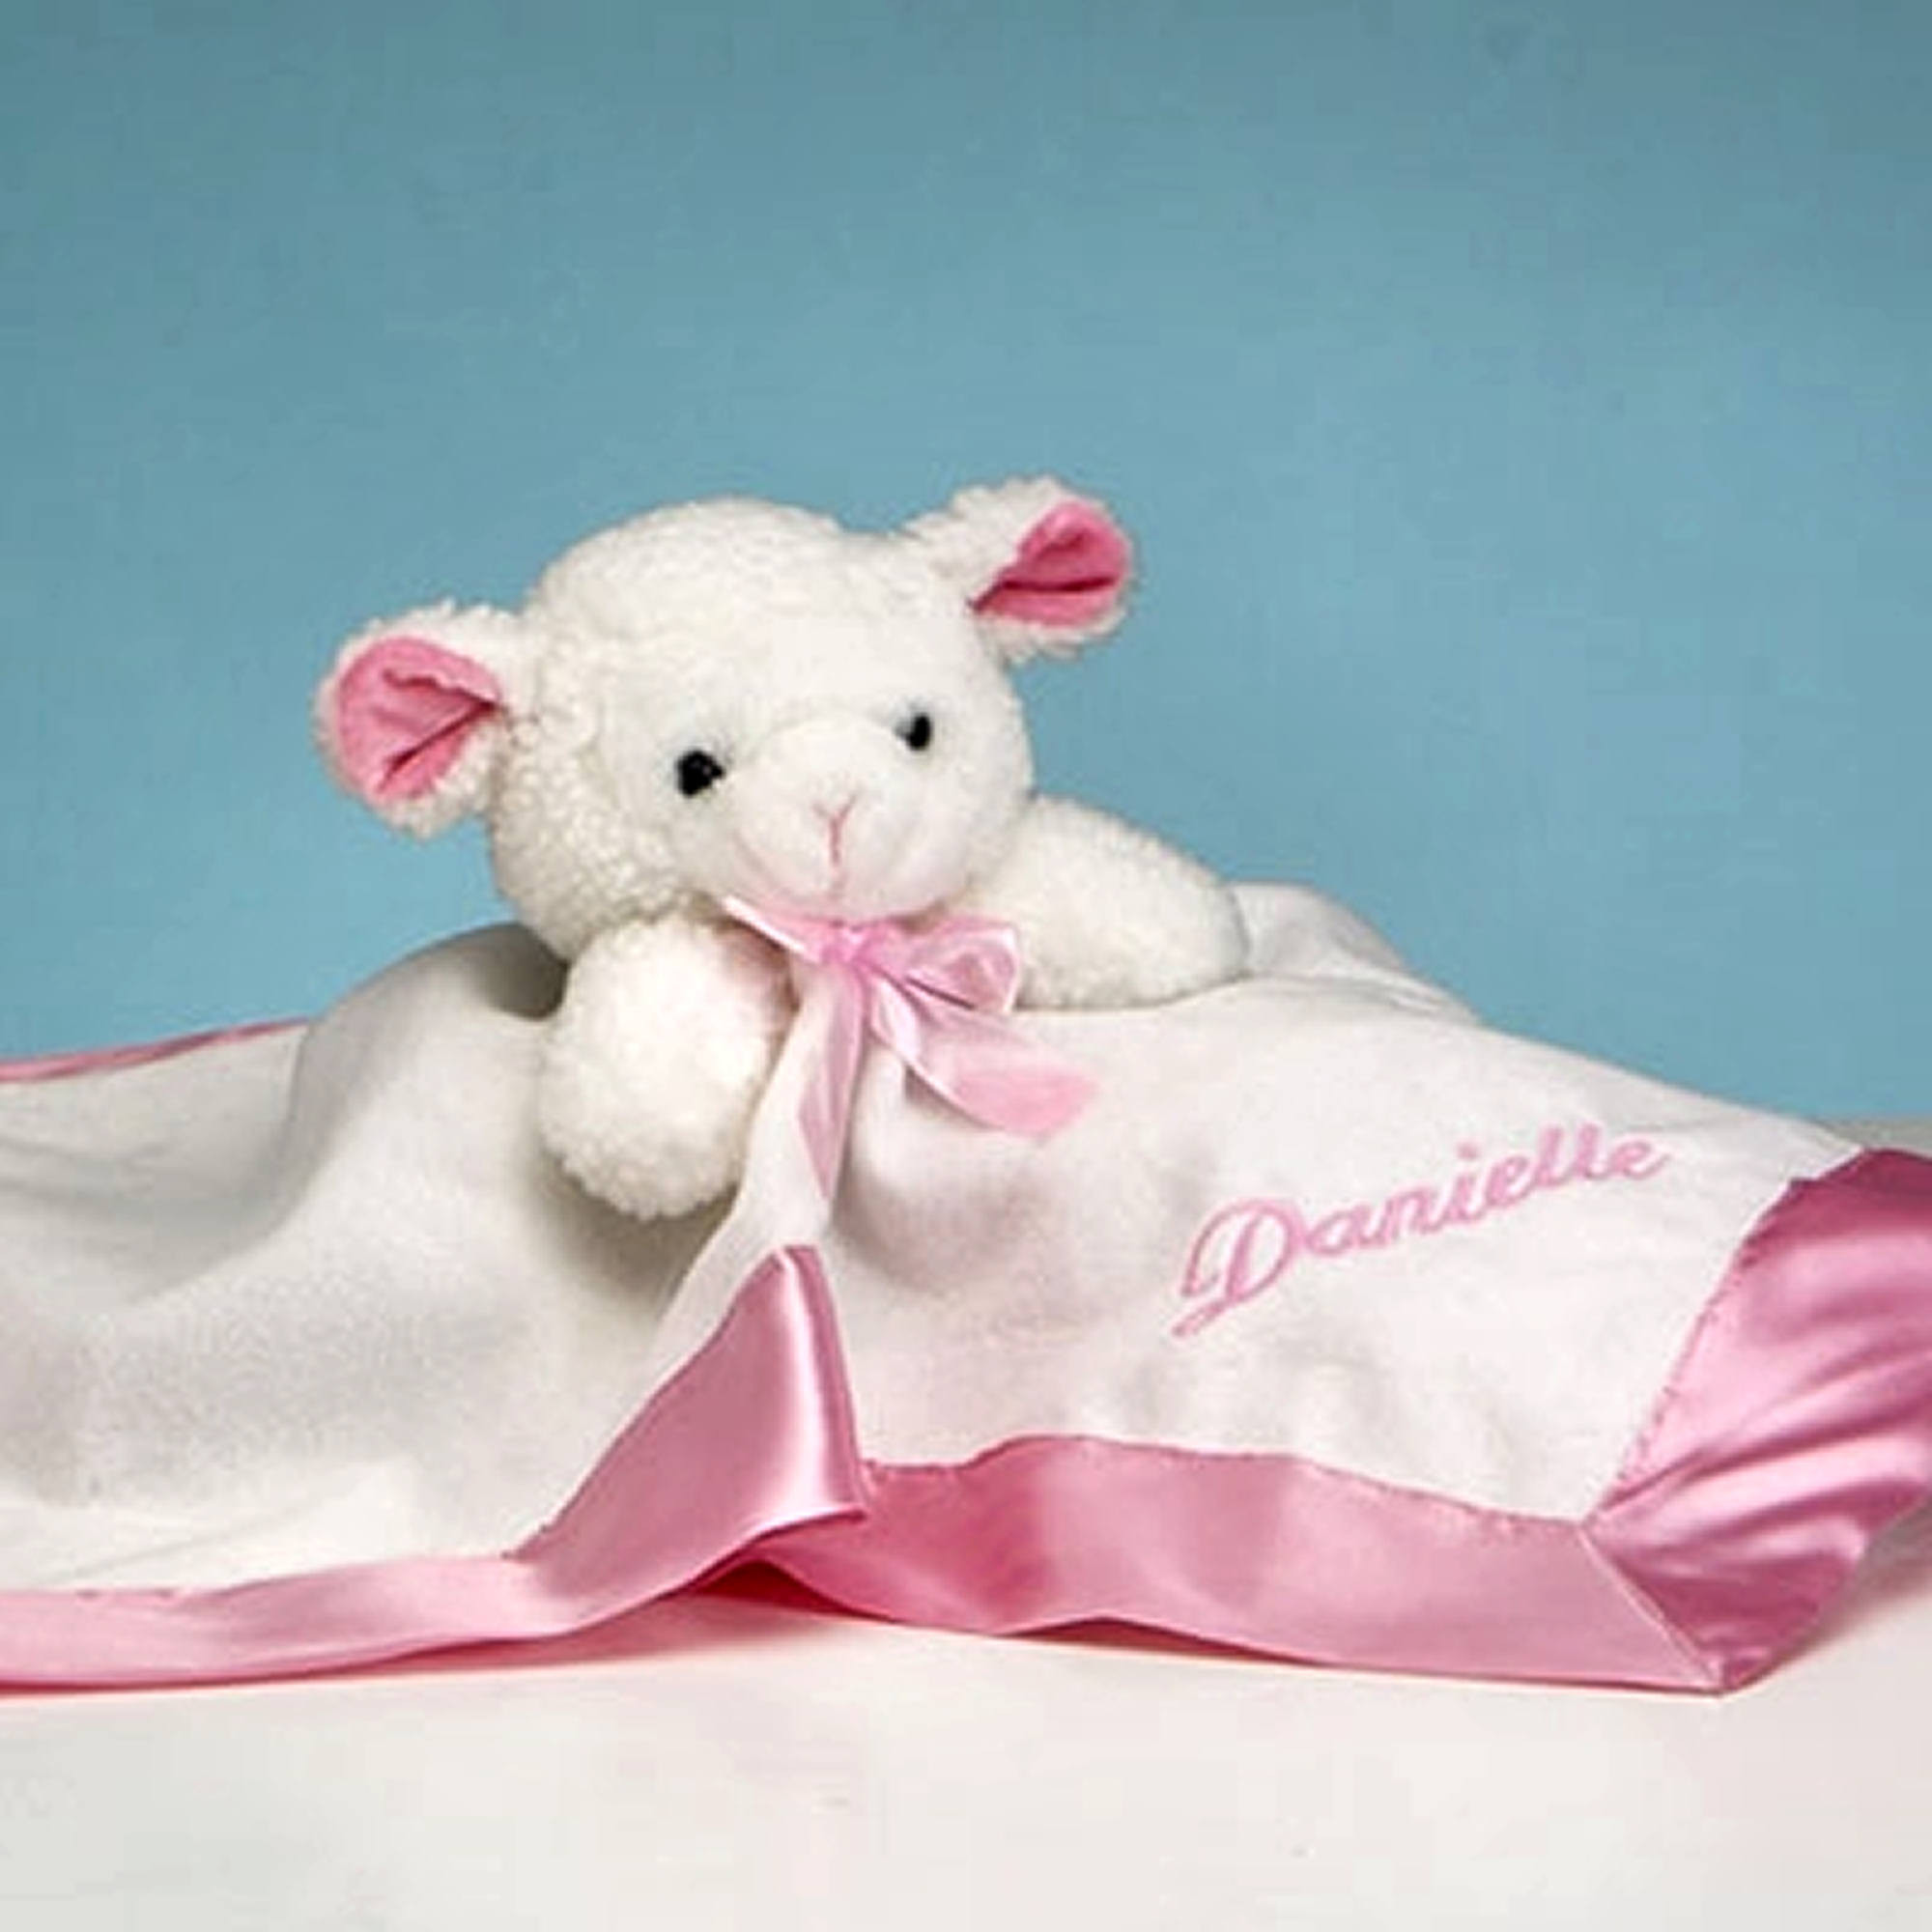 Lamb Baby Gifts
 Personalized Baby Lovie Security Blanket Pink Lamb